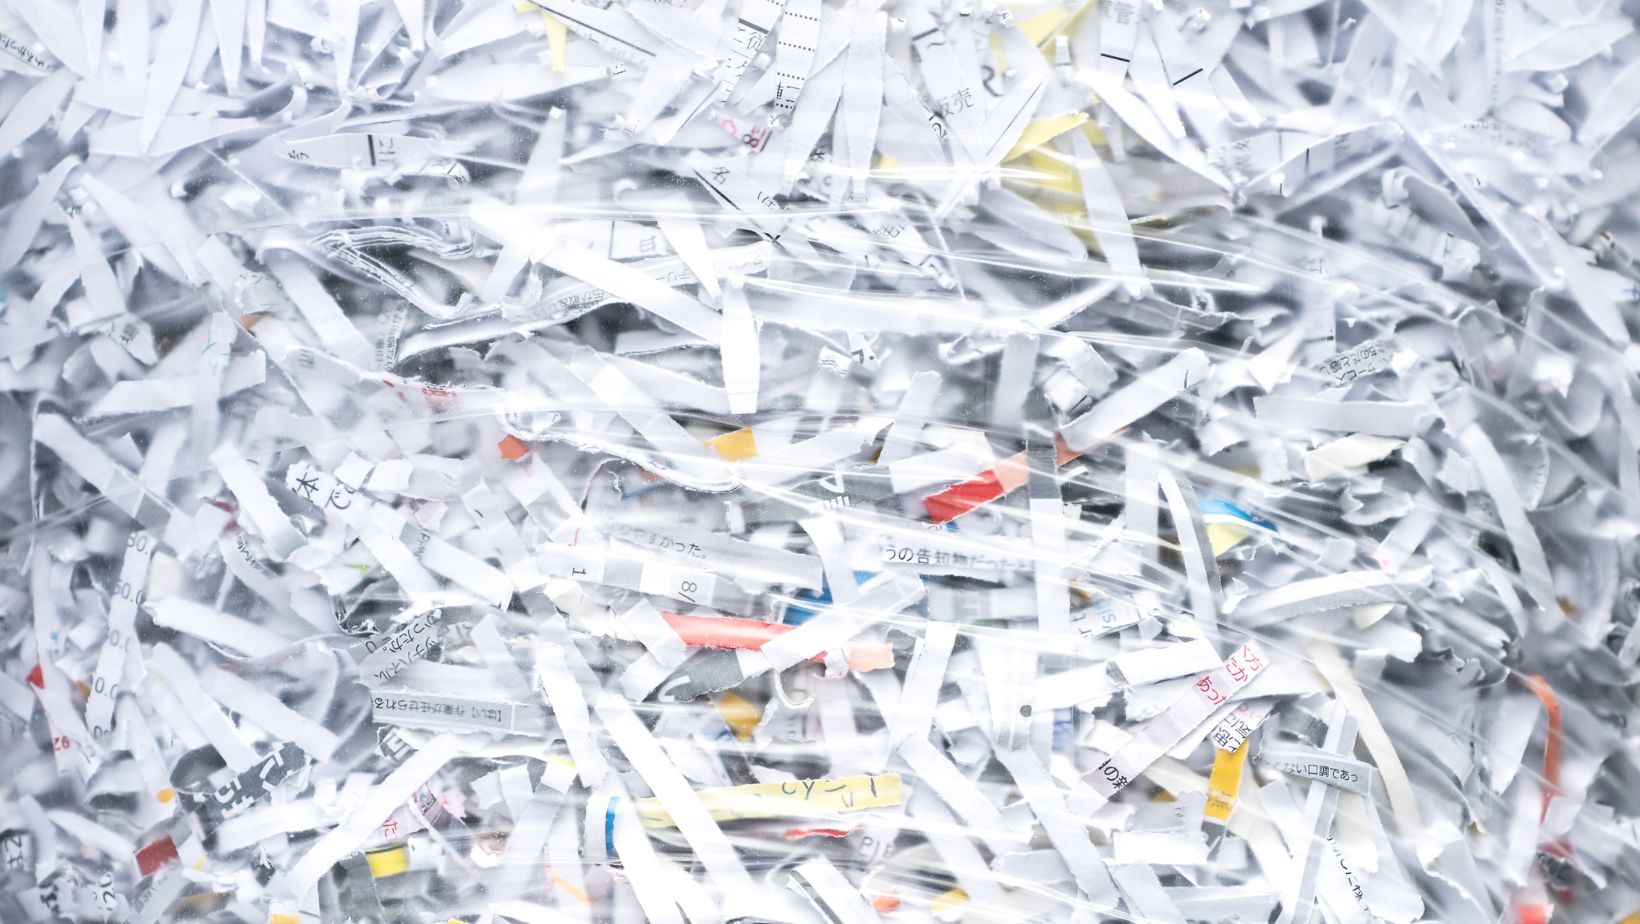 Best Practices For Using Secure Document Shredding Services